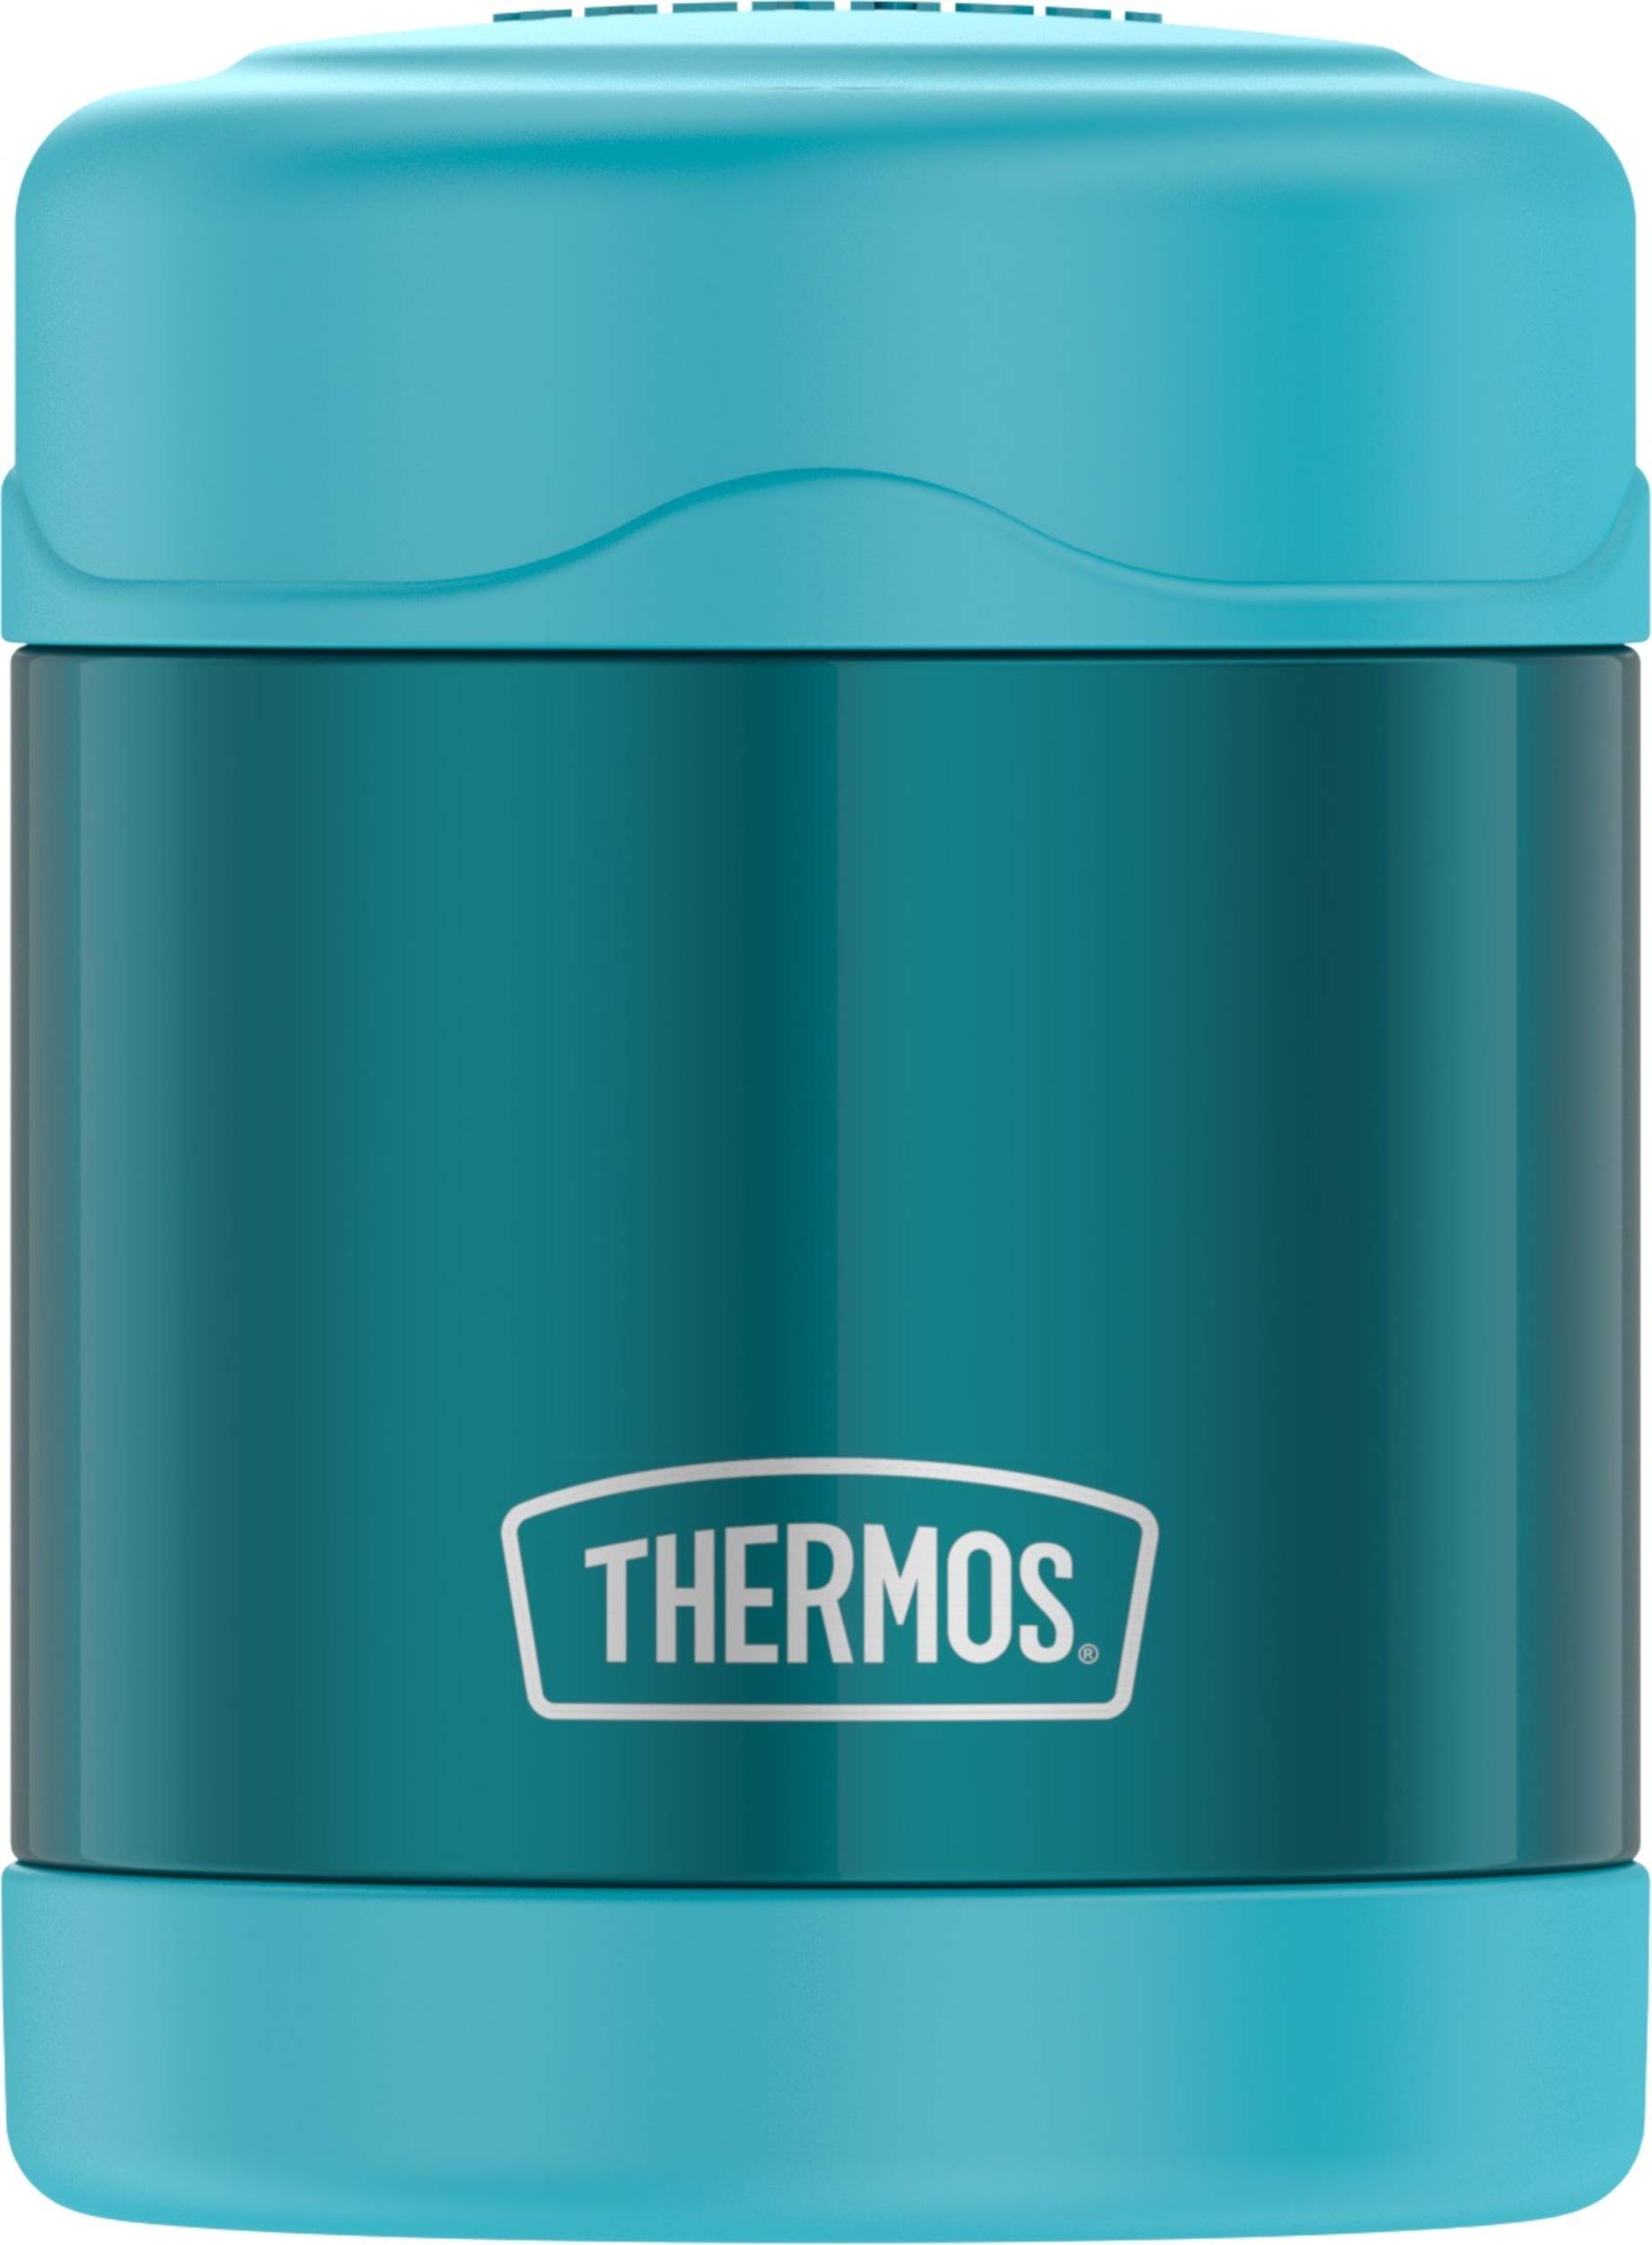 THERMOS F30019TL6 Stainless Steel FUNTAINER 10 Ounce Food Jar Edelstahl-Funnainer 284 ml, blaugrün